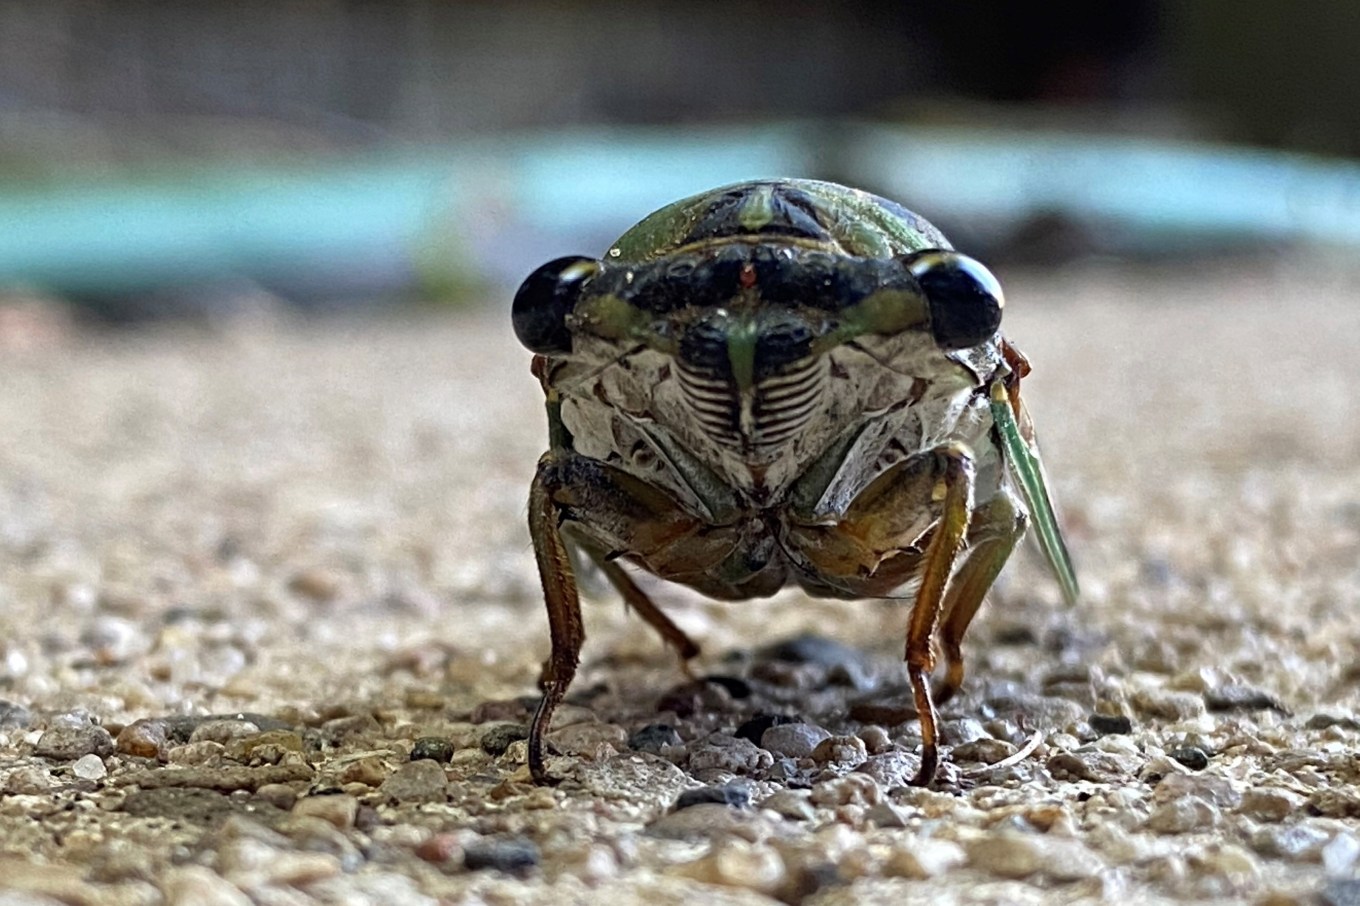 A close-up, head-on picture of a cicada.